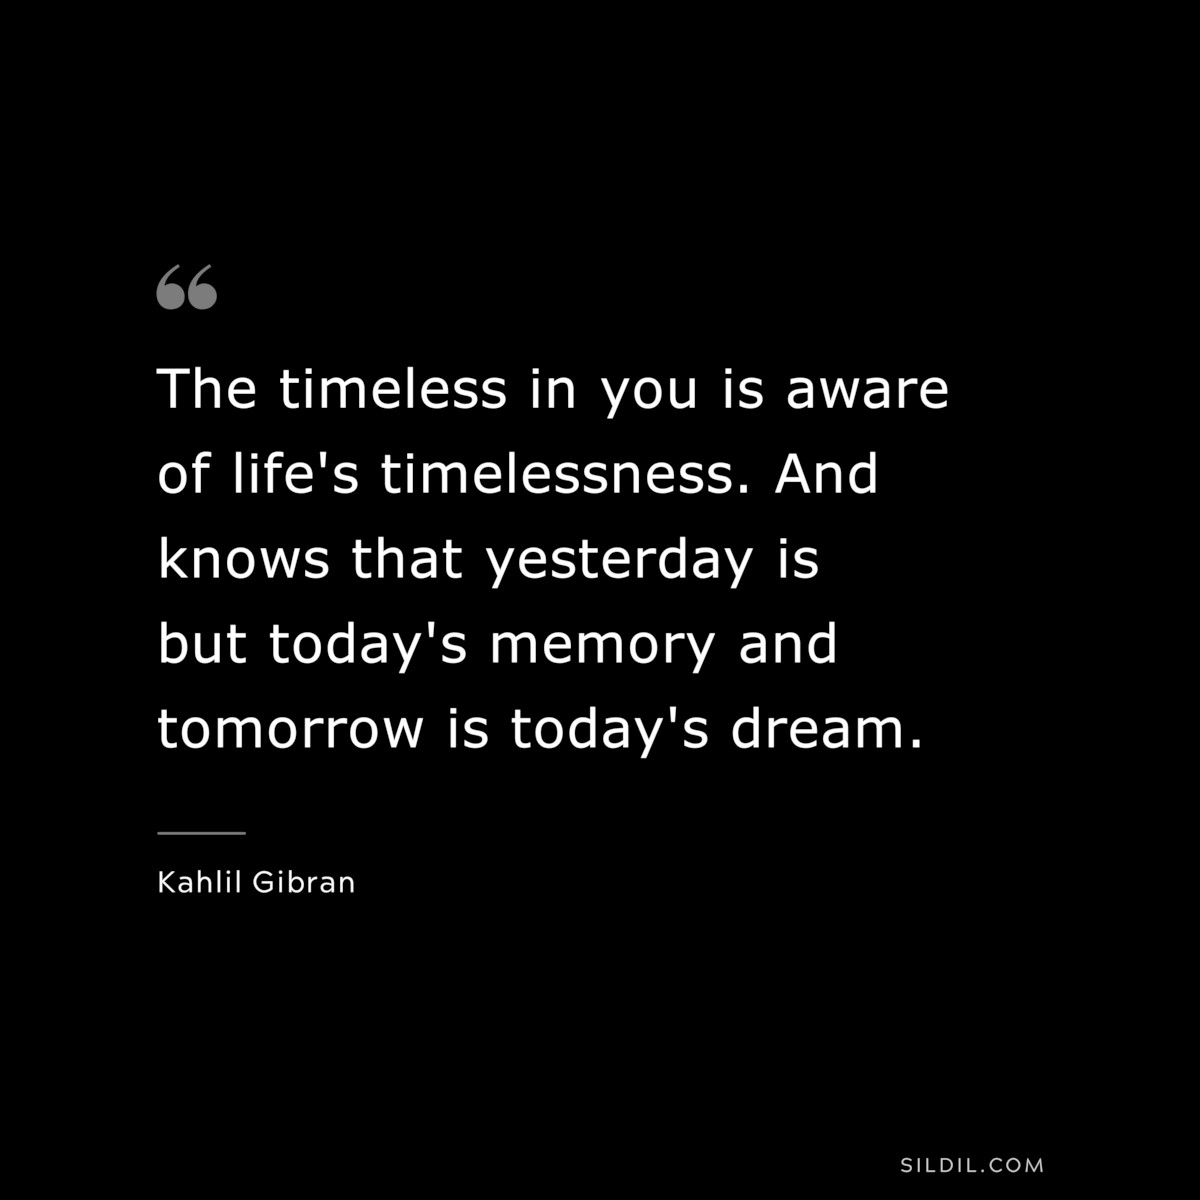 The timeless in you is aware of life's timelessness. And knows that yesterday is but today's memory and tomorrow is today's dream. ― Kahlil Gibran